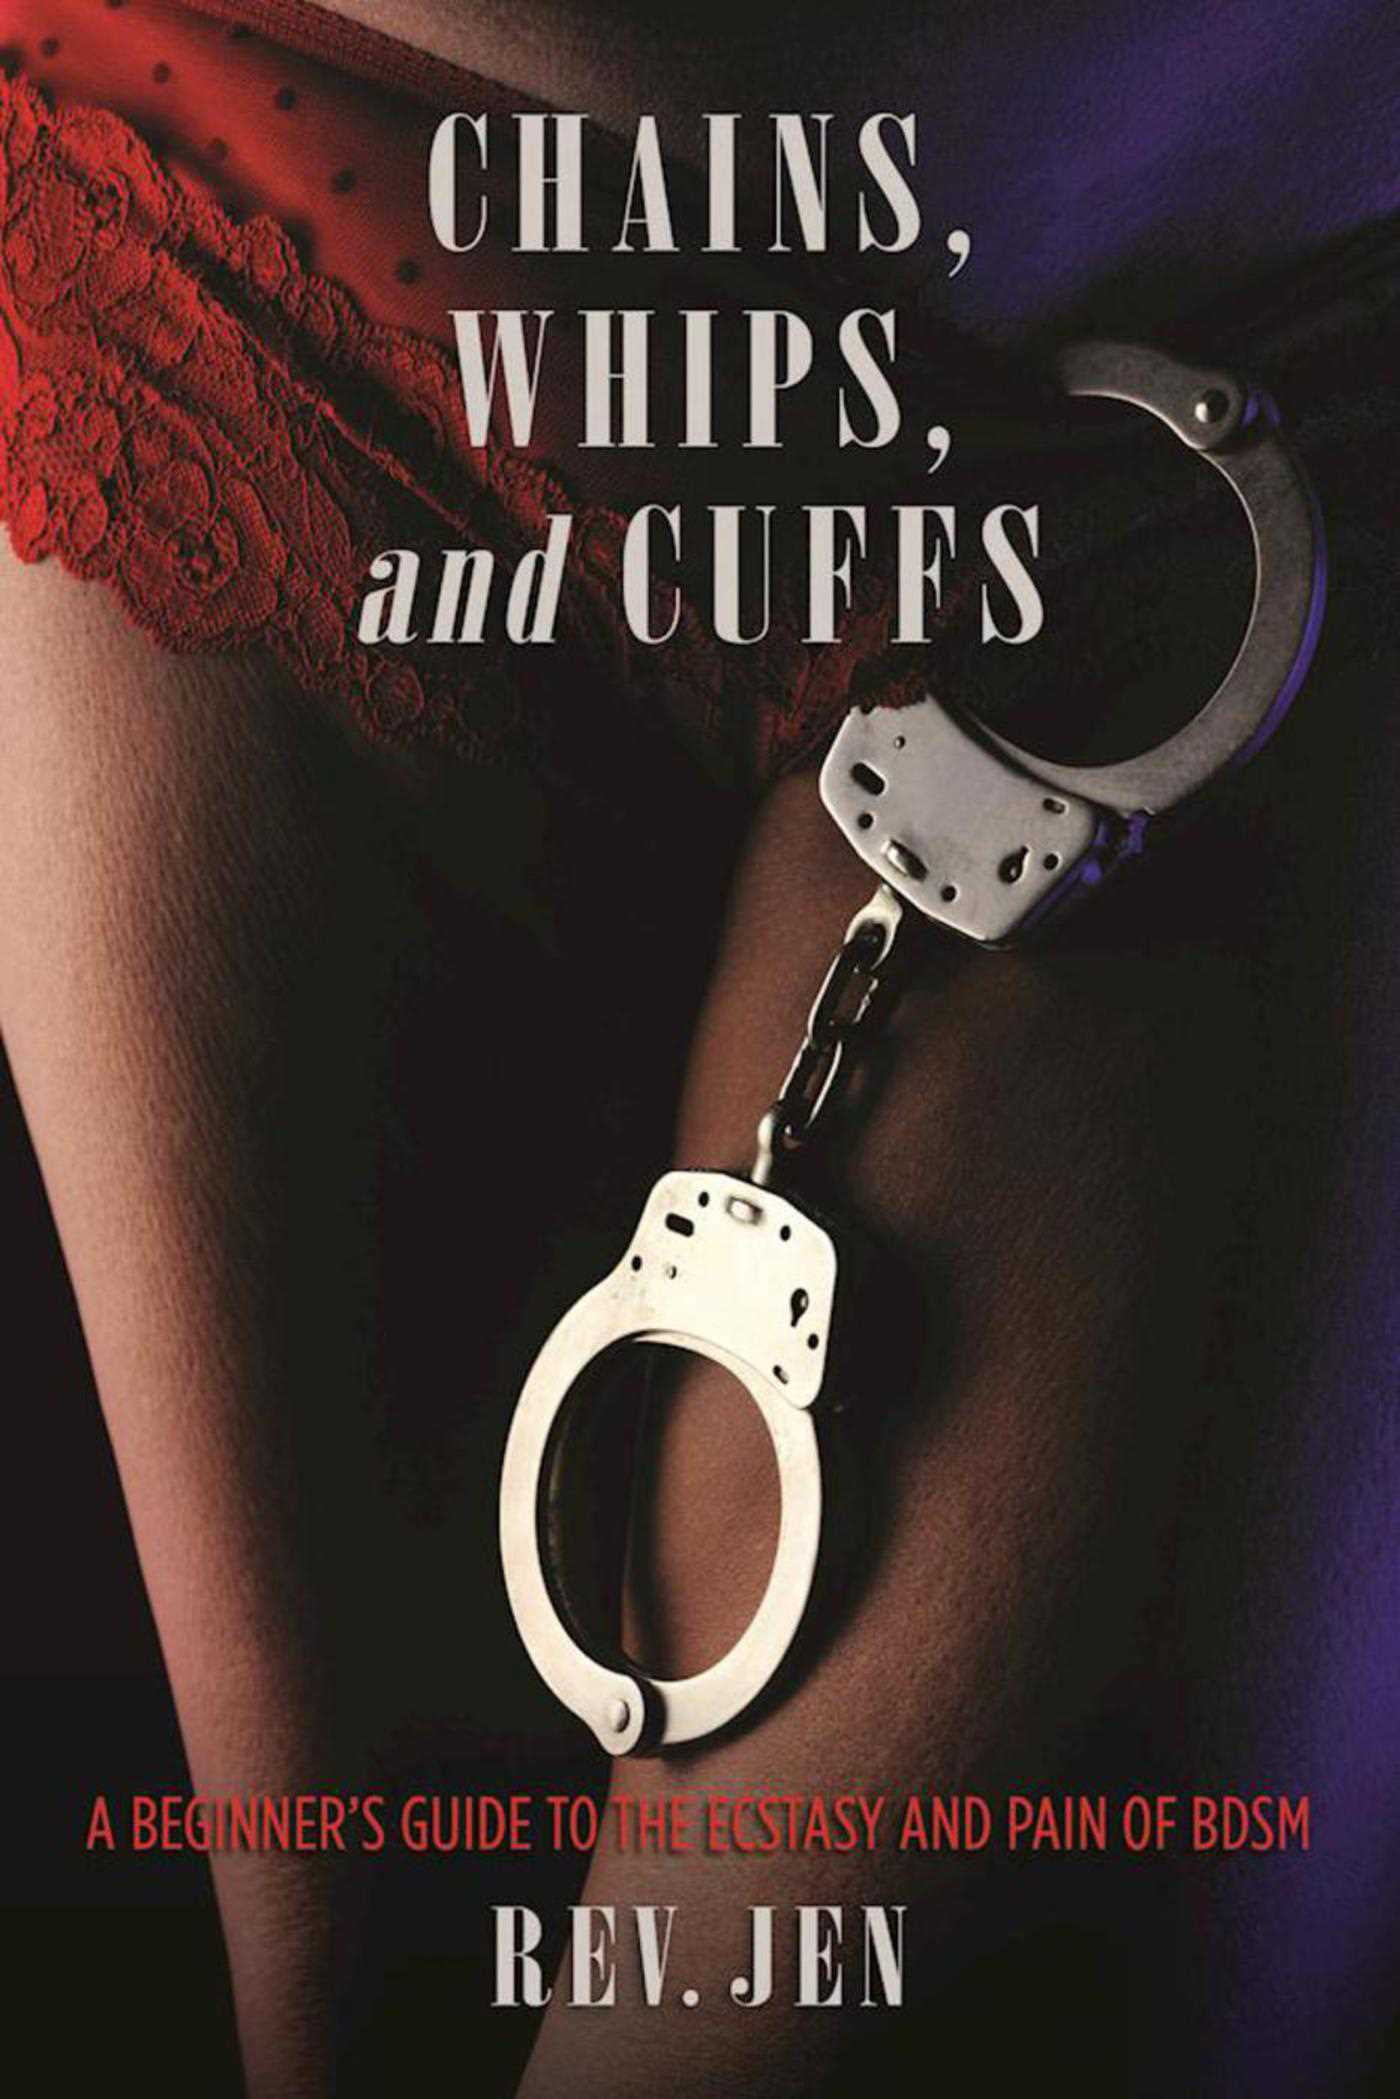 Cuffs and chains college spanking